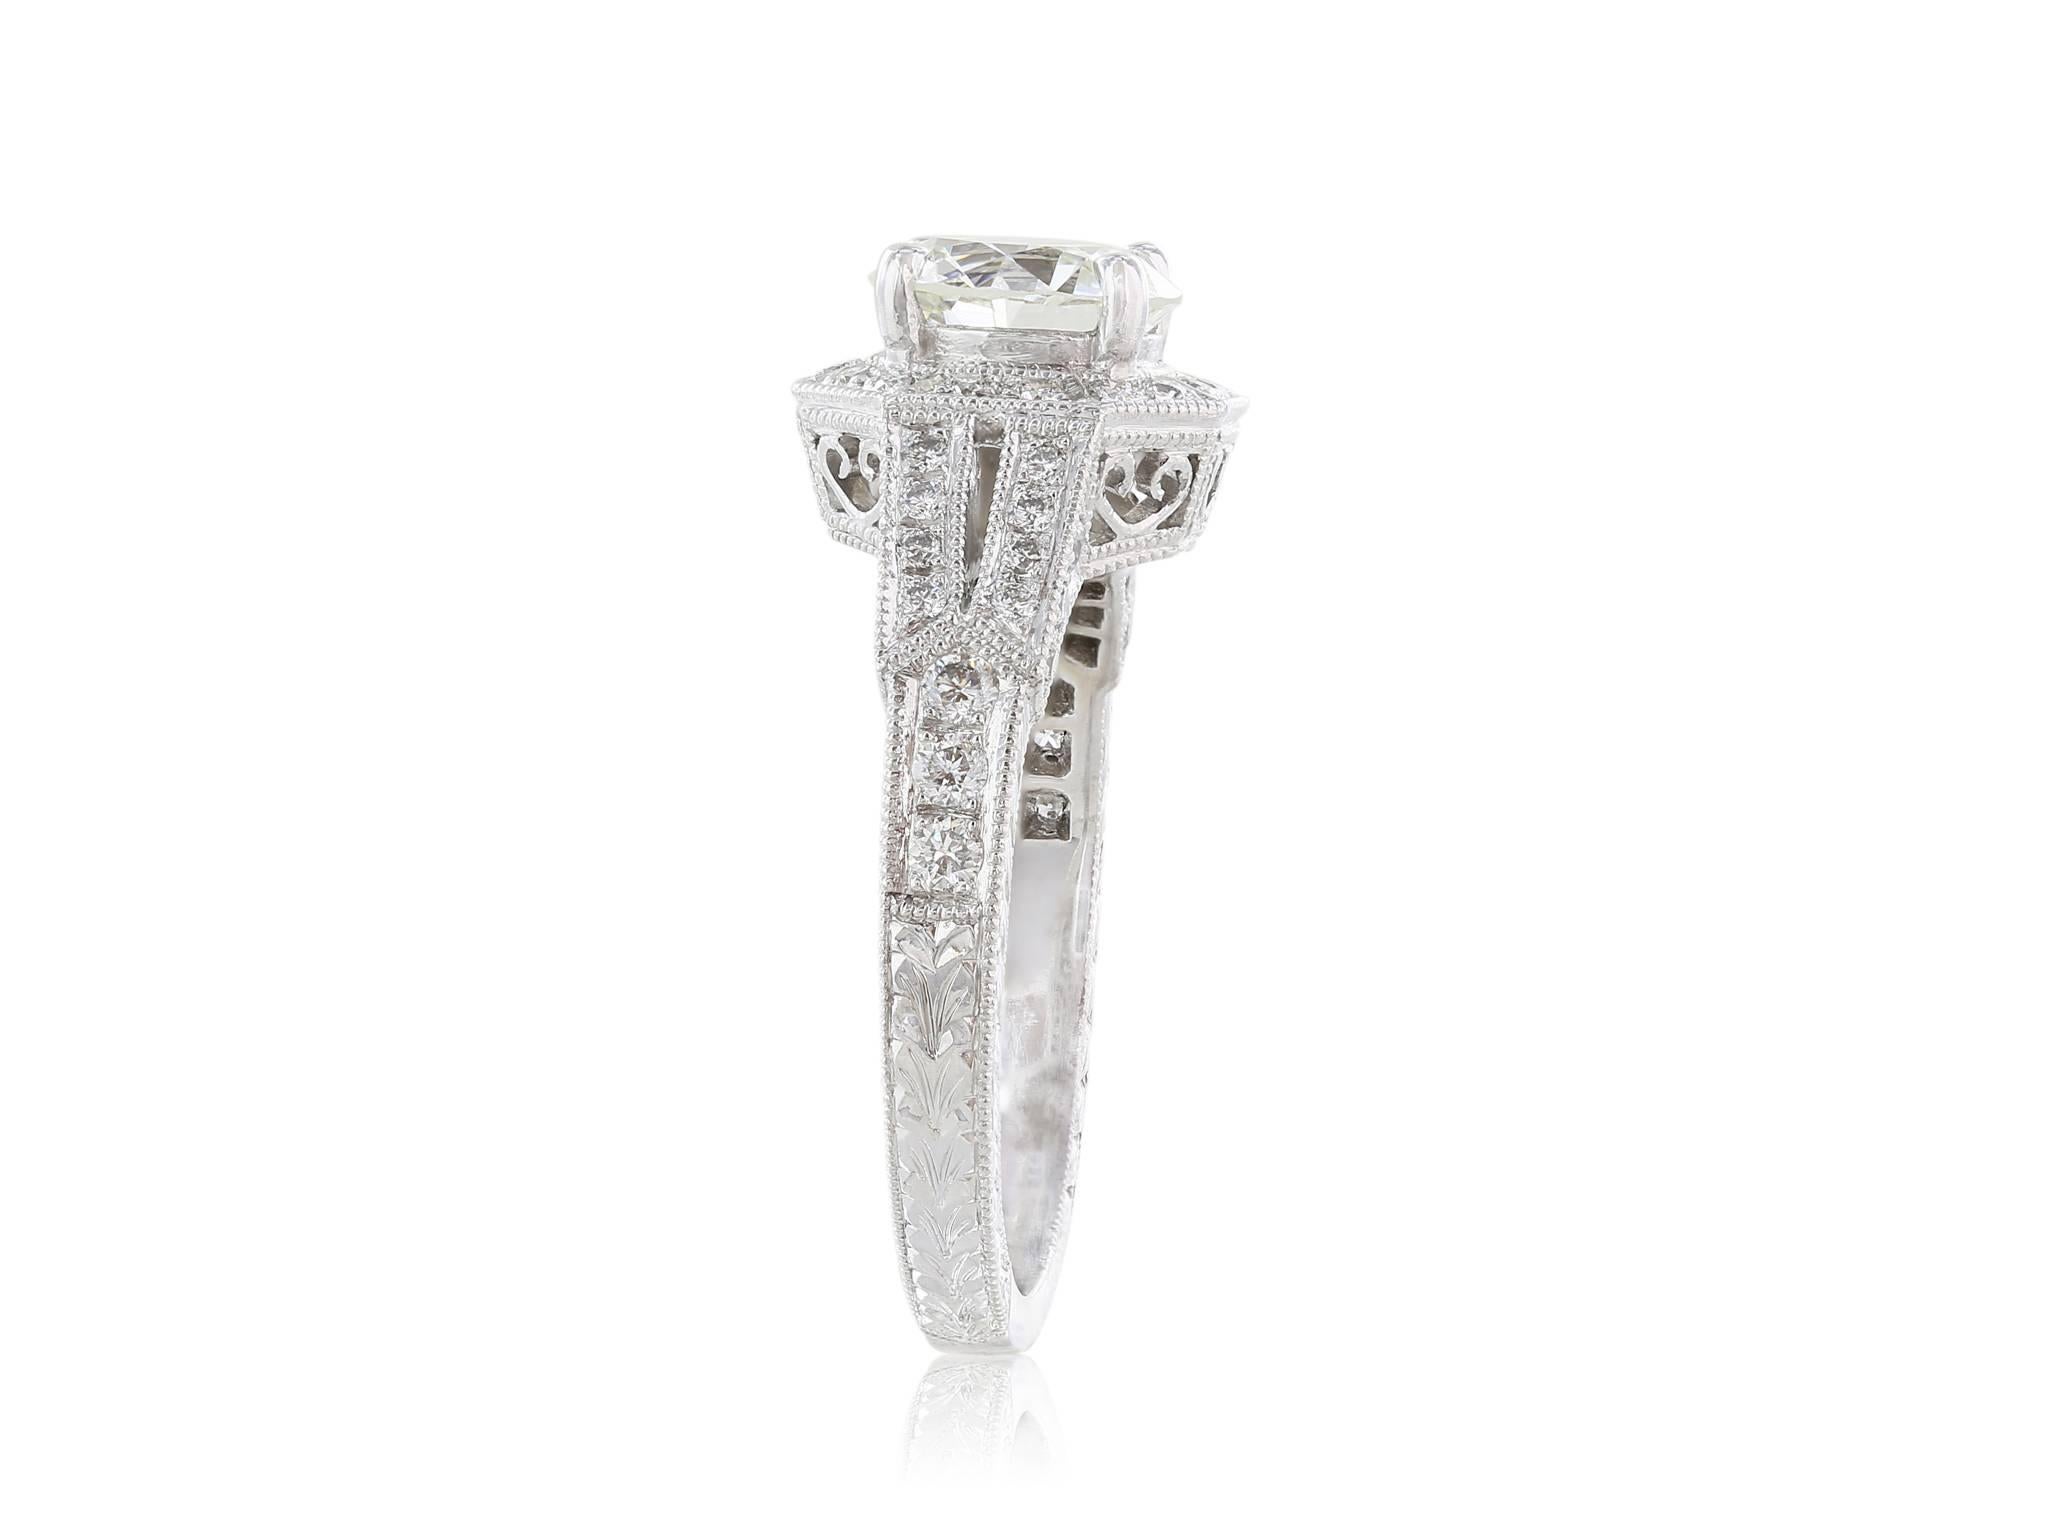 1.31 carat old European cut diamond with a color of I and a clarity of VS1.  The diamond is set in an ornate, hexagon shaped, micro pave diamond mounting with half way diamond shank and millgraine sides. Platinum mounting